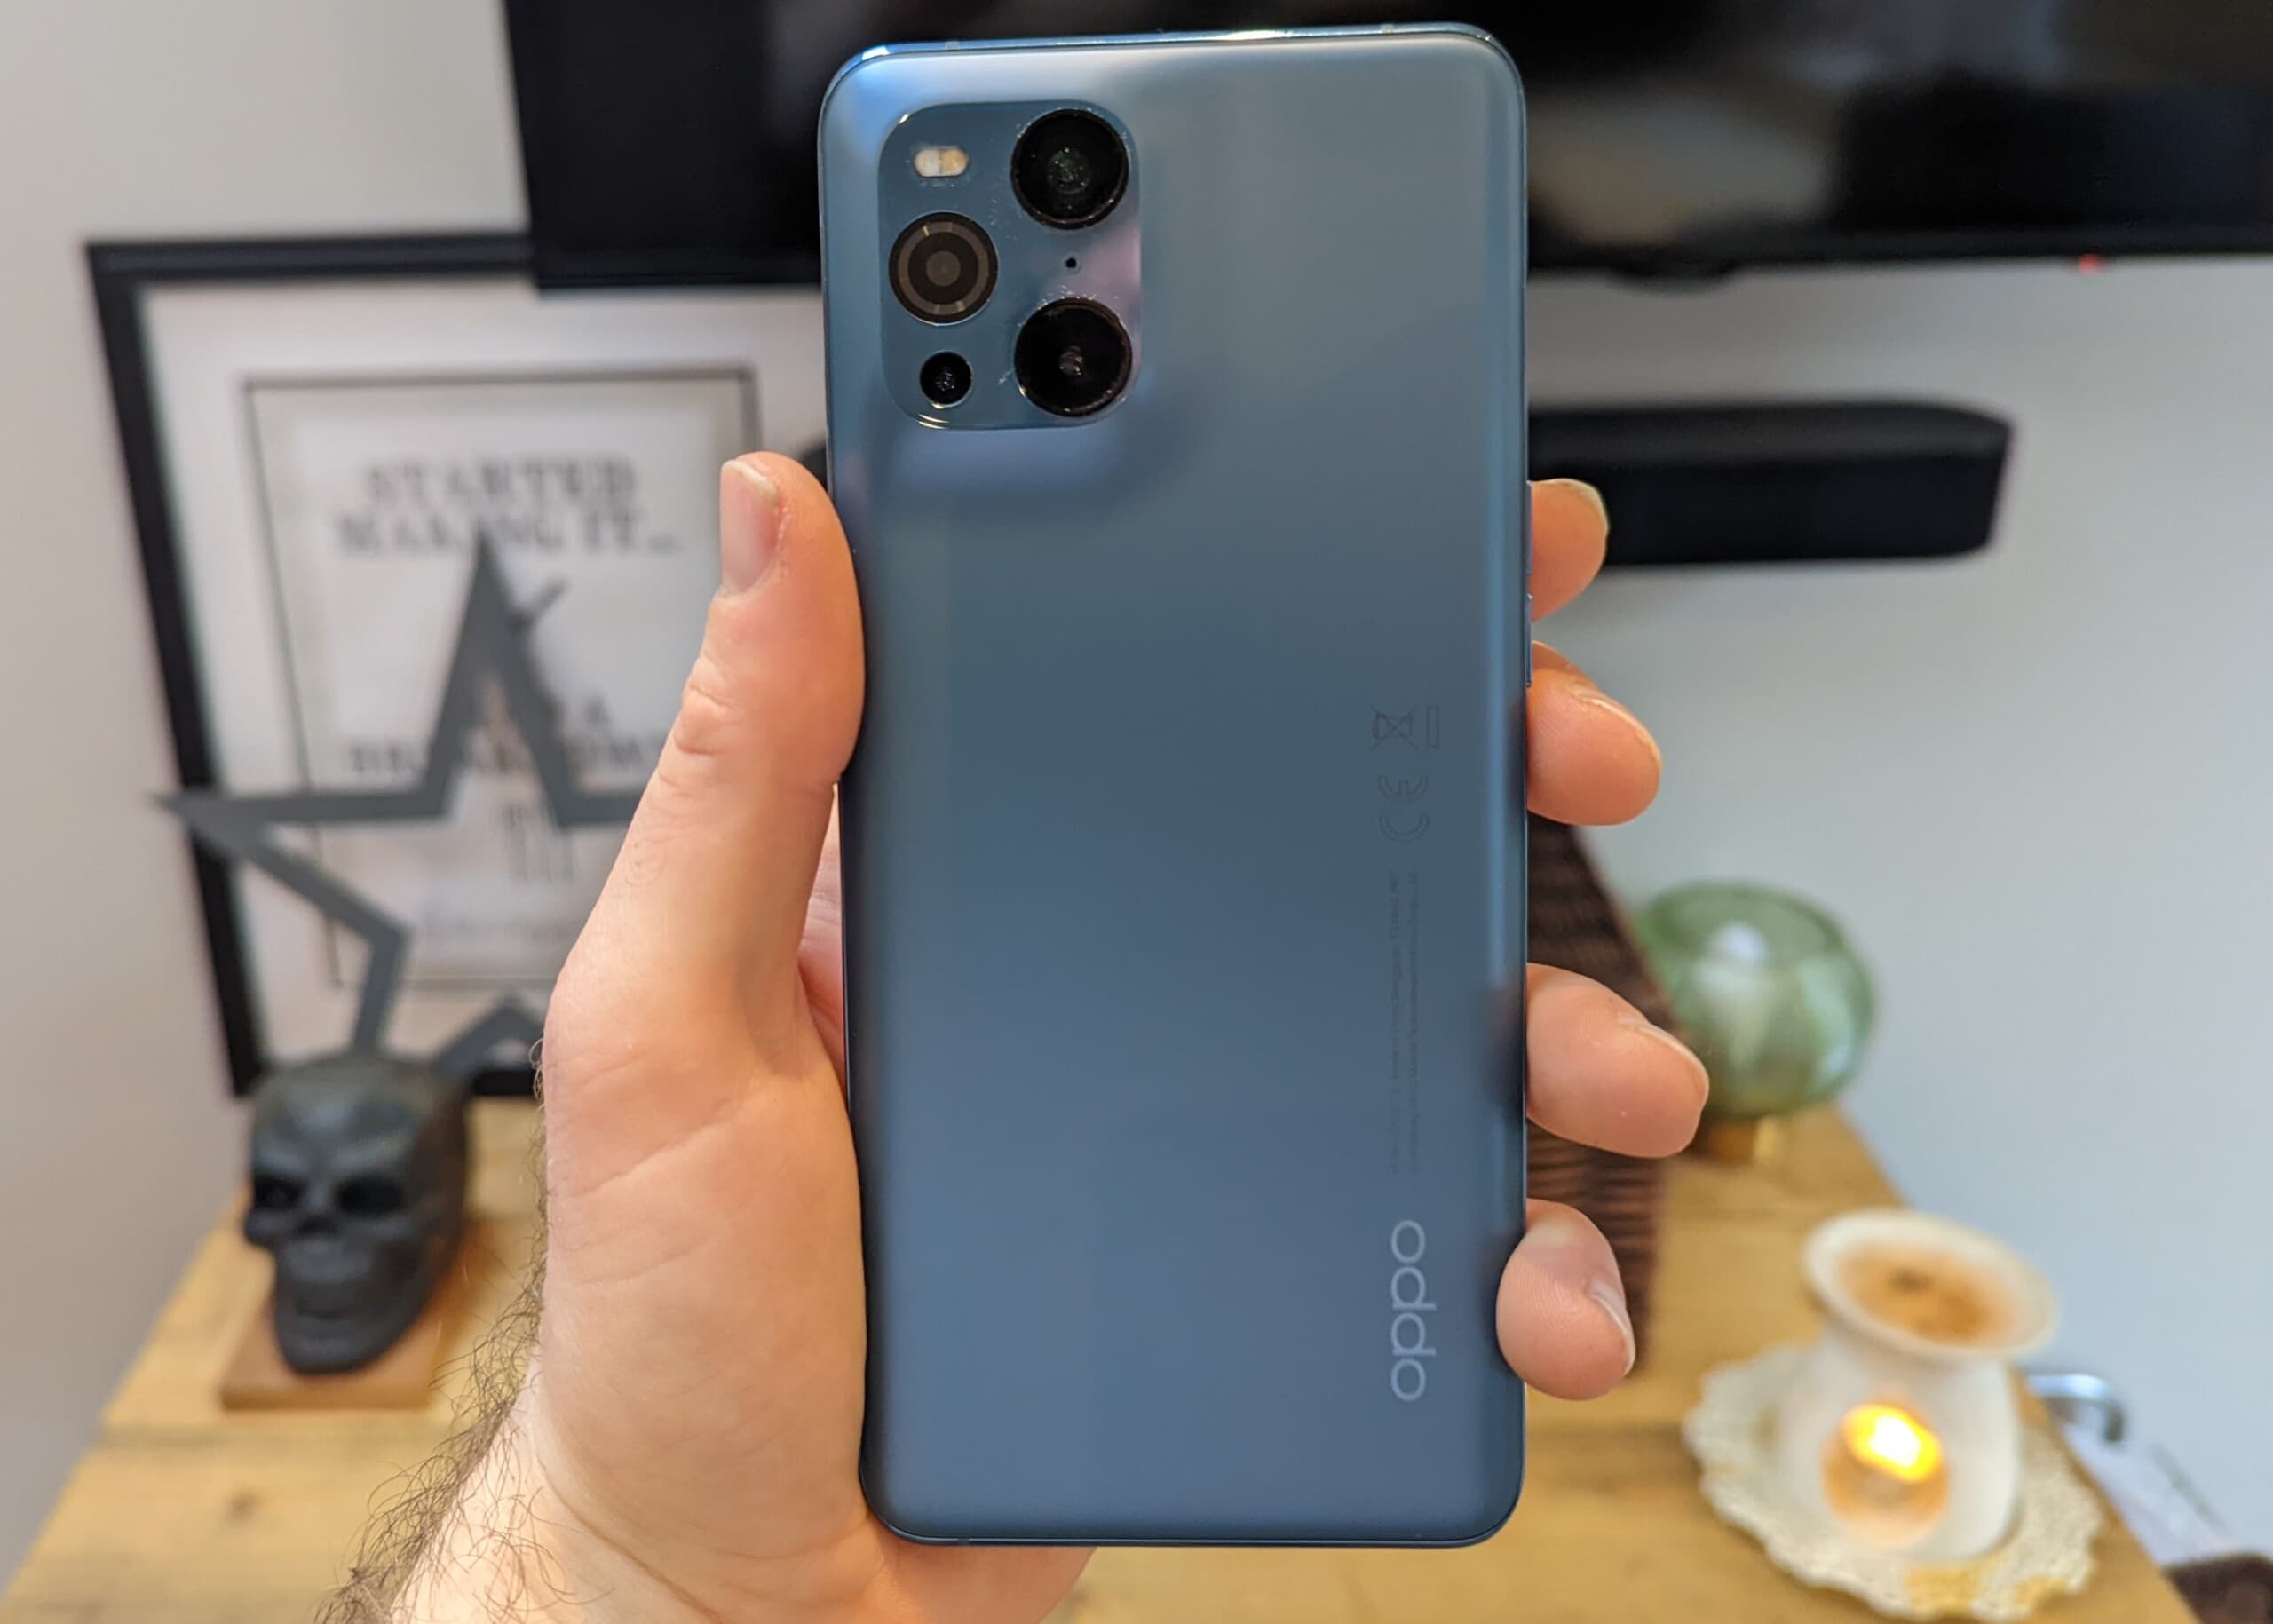 OPPO Find X3 Pro Review – A premium flagship phone that can compete with the Samsung Galaxy S21 Ultra